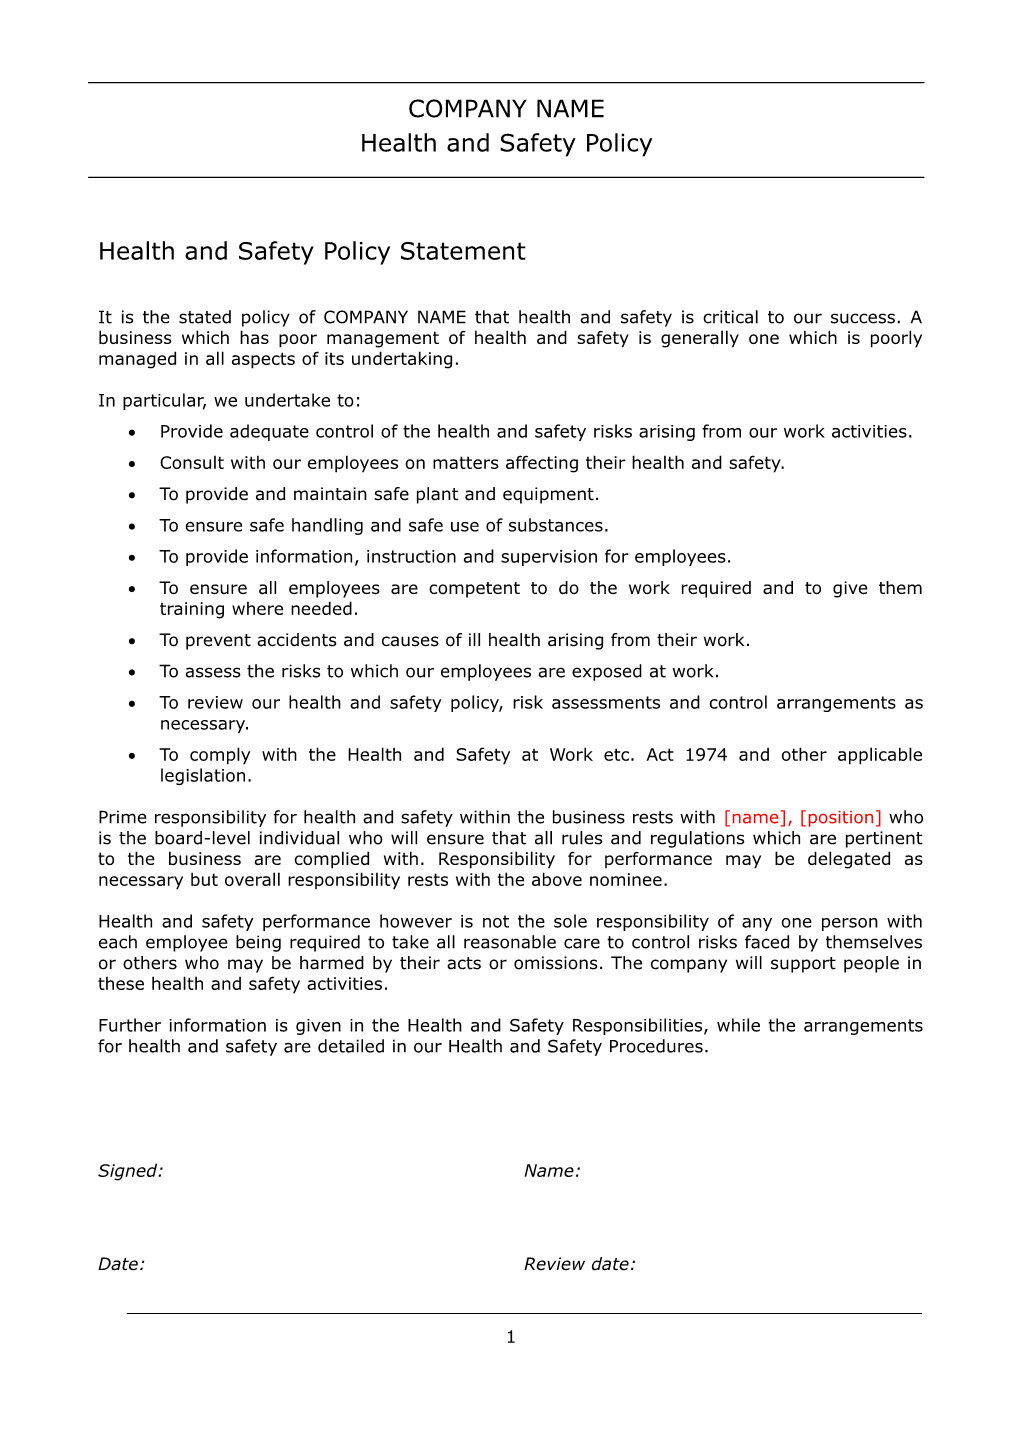 Health and Safety Policy Statement s4